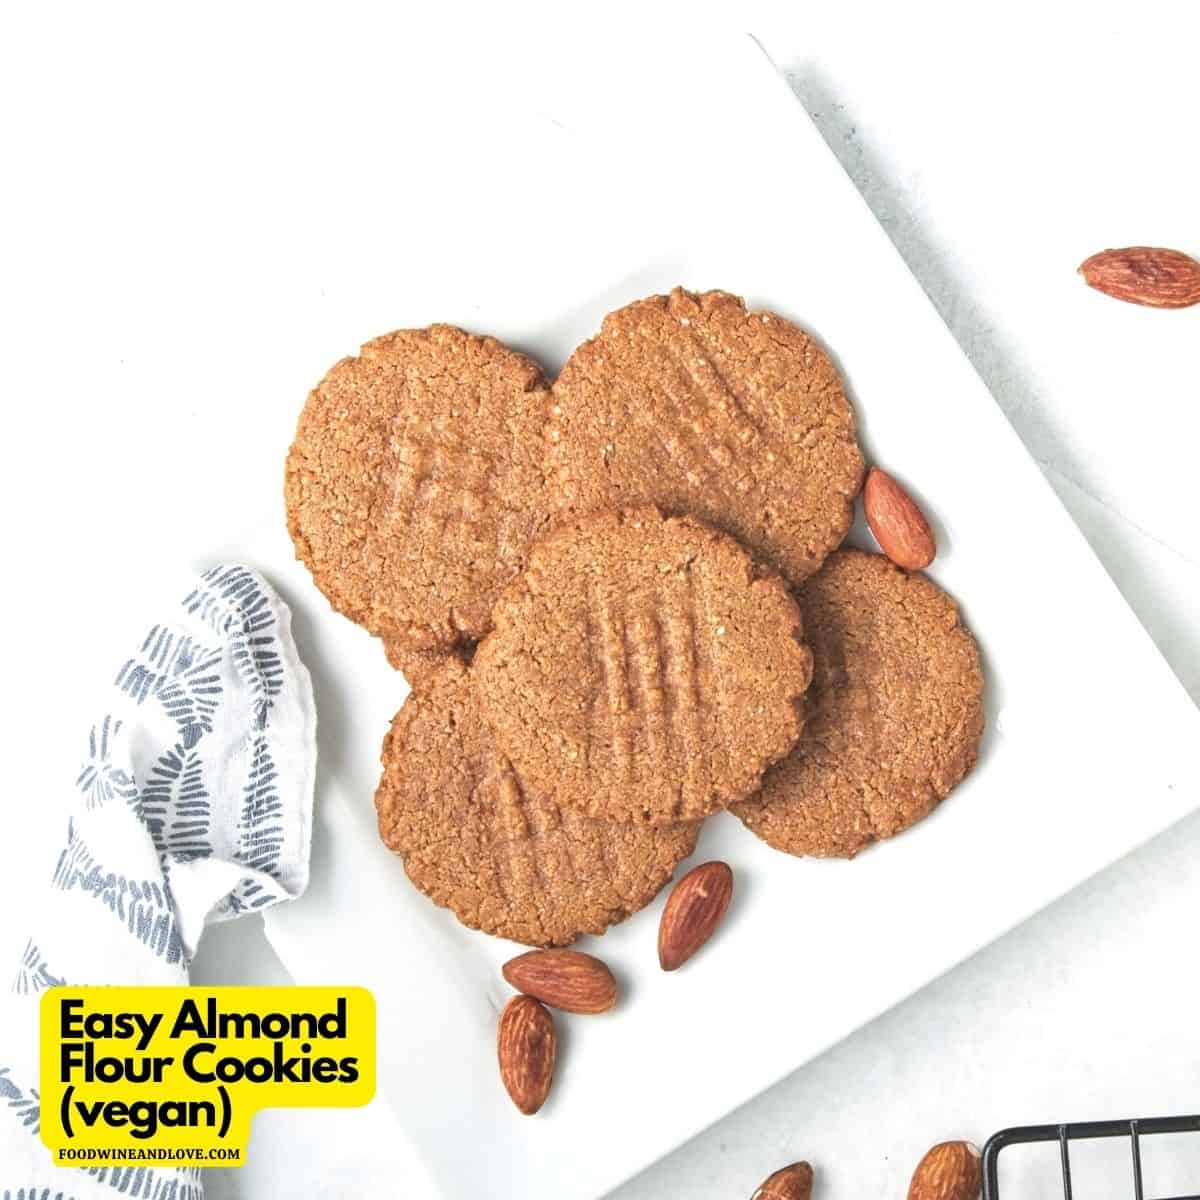 Easy Almond Flour Cookies (vegan), delicious and wholesome dessert recipe made with nutritious ingredients. Vegan, GF, Refined Sugar Free.